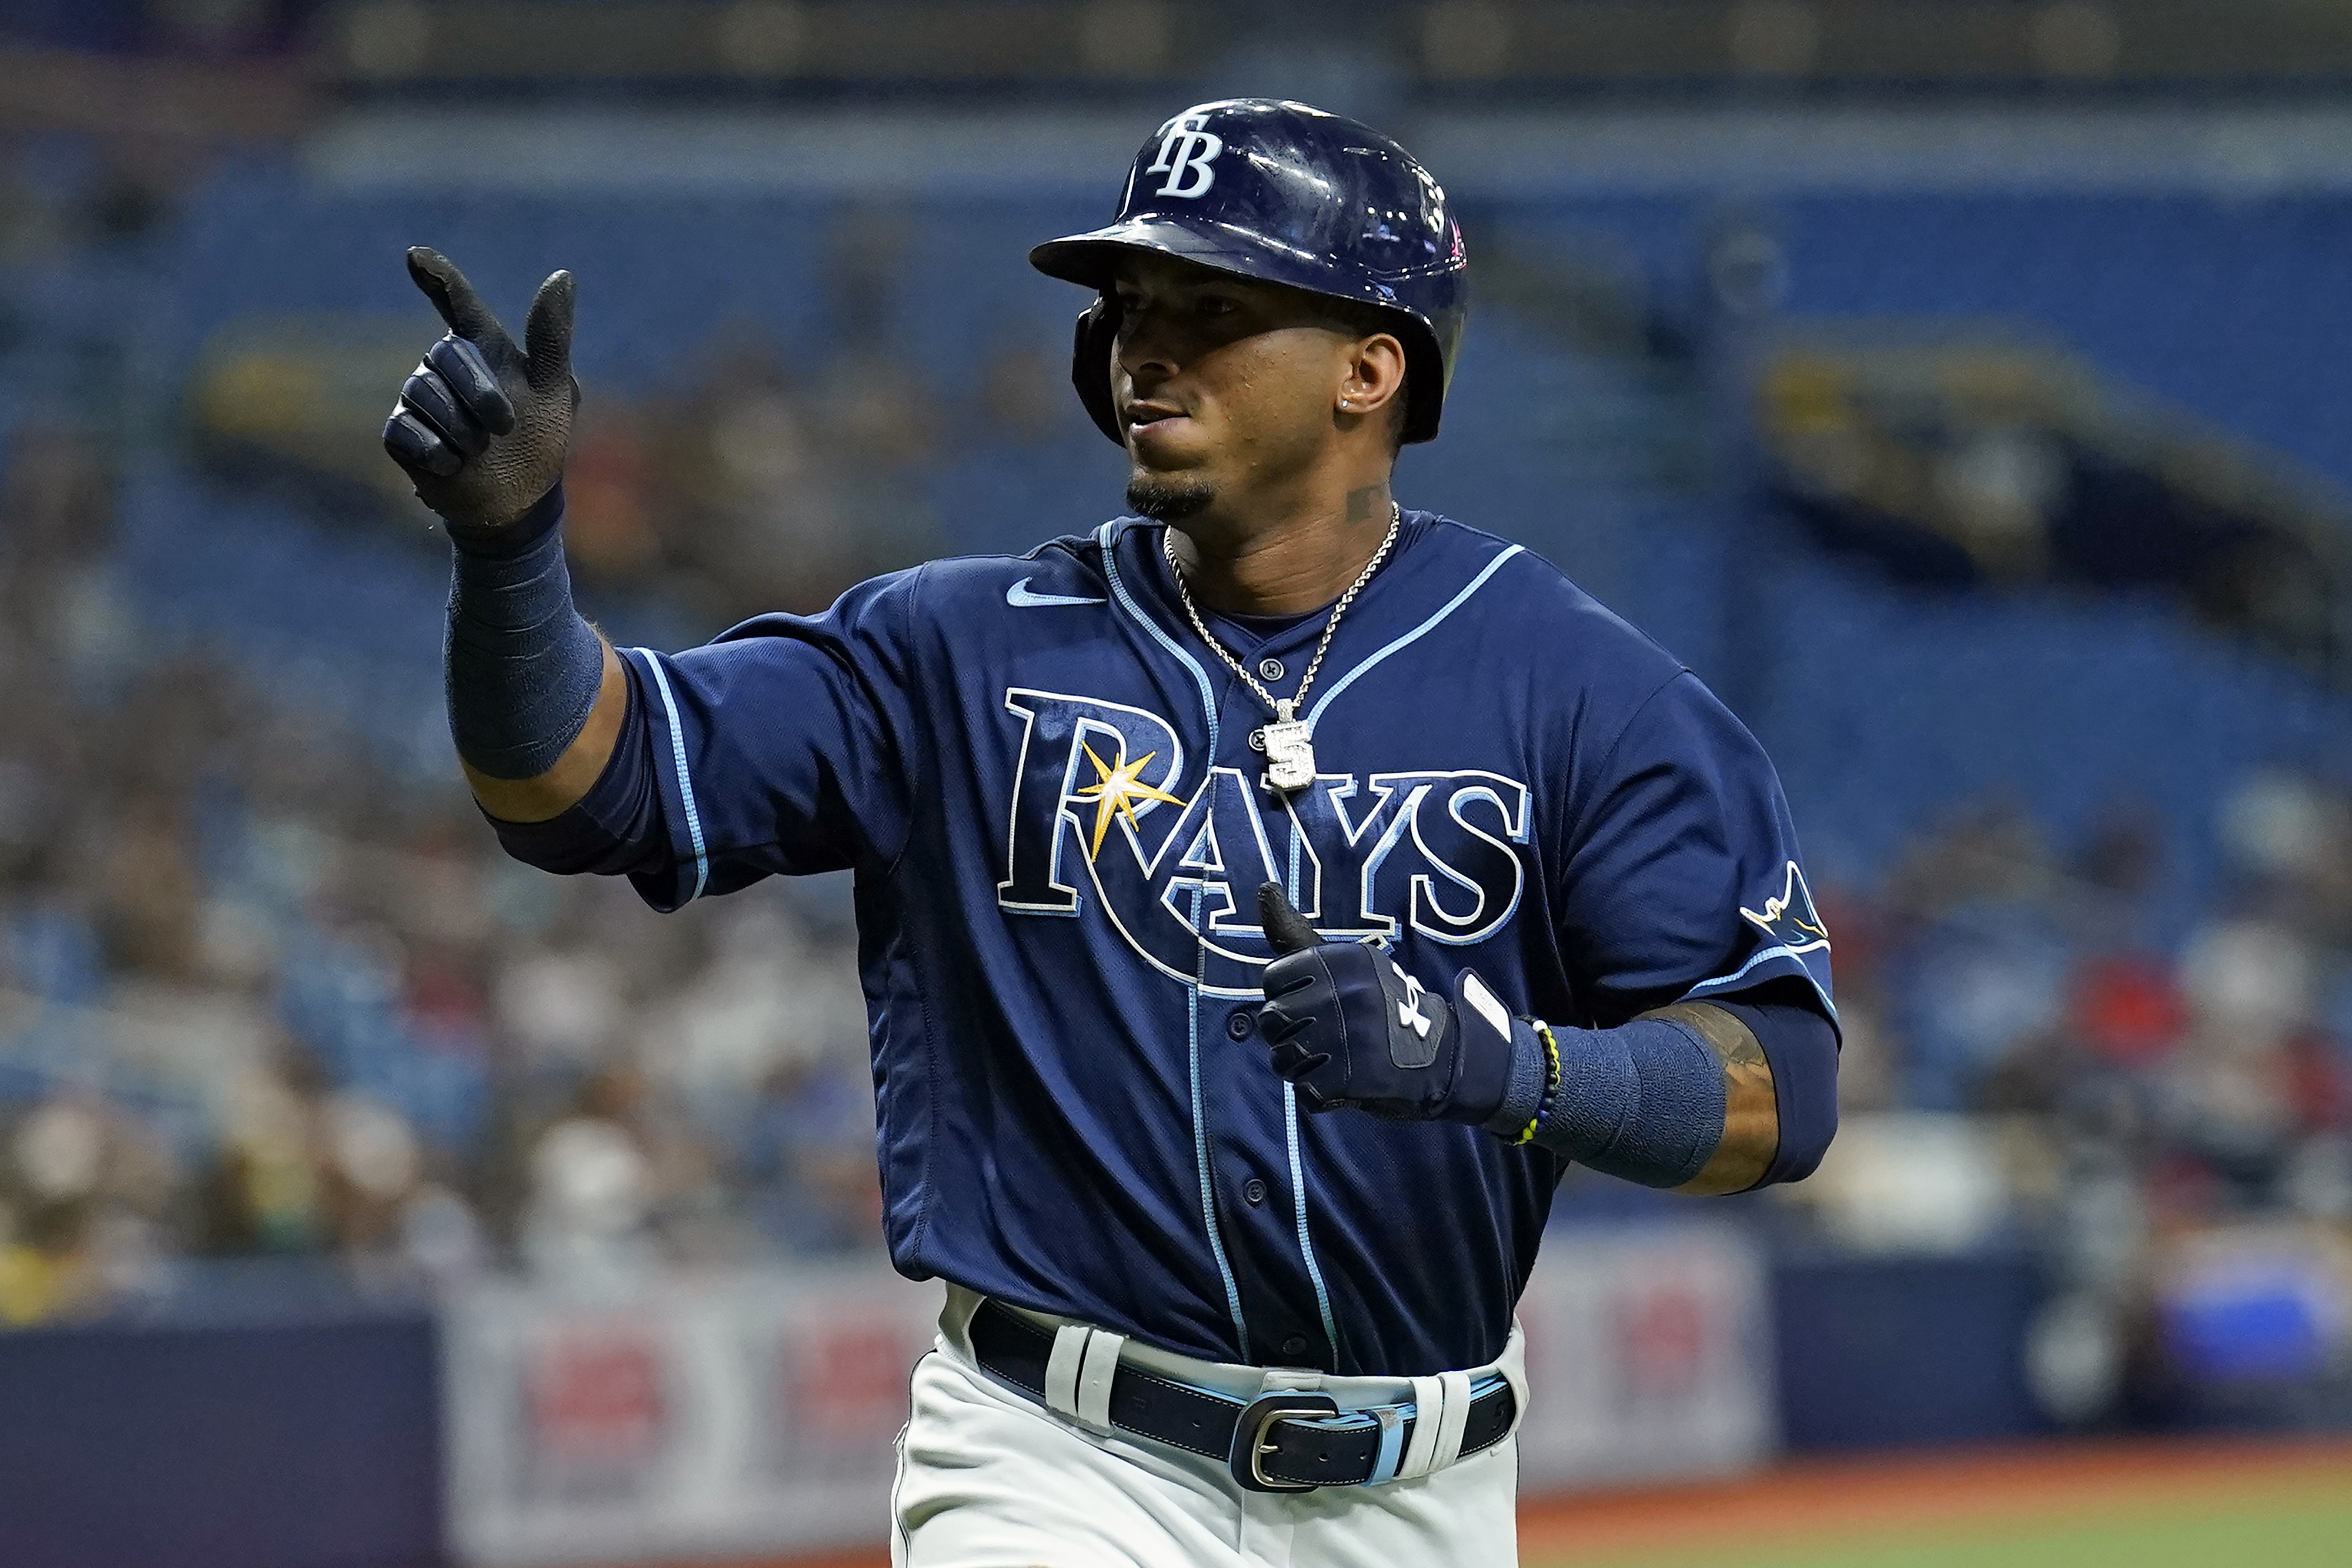 Rays SS Wander Franco enters Catch of the Year race with